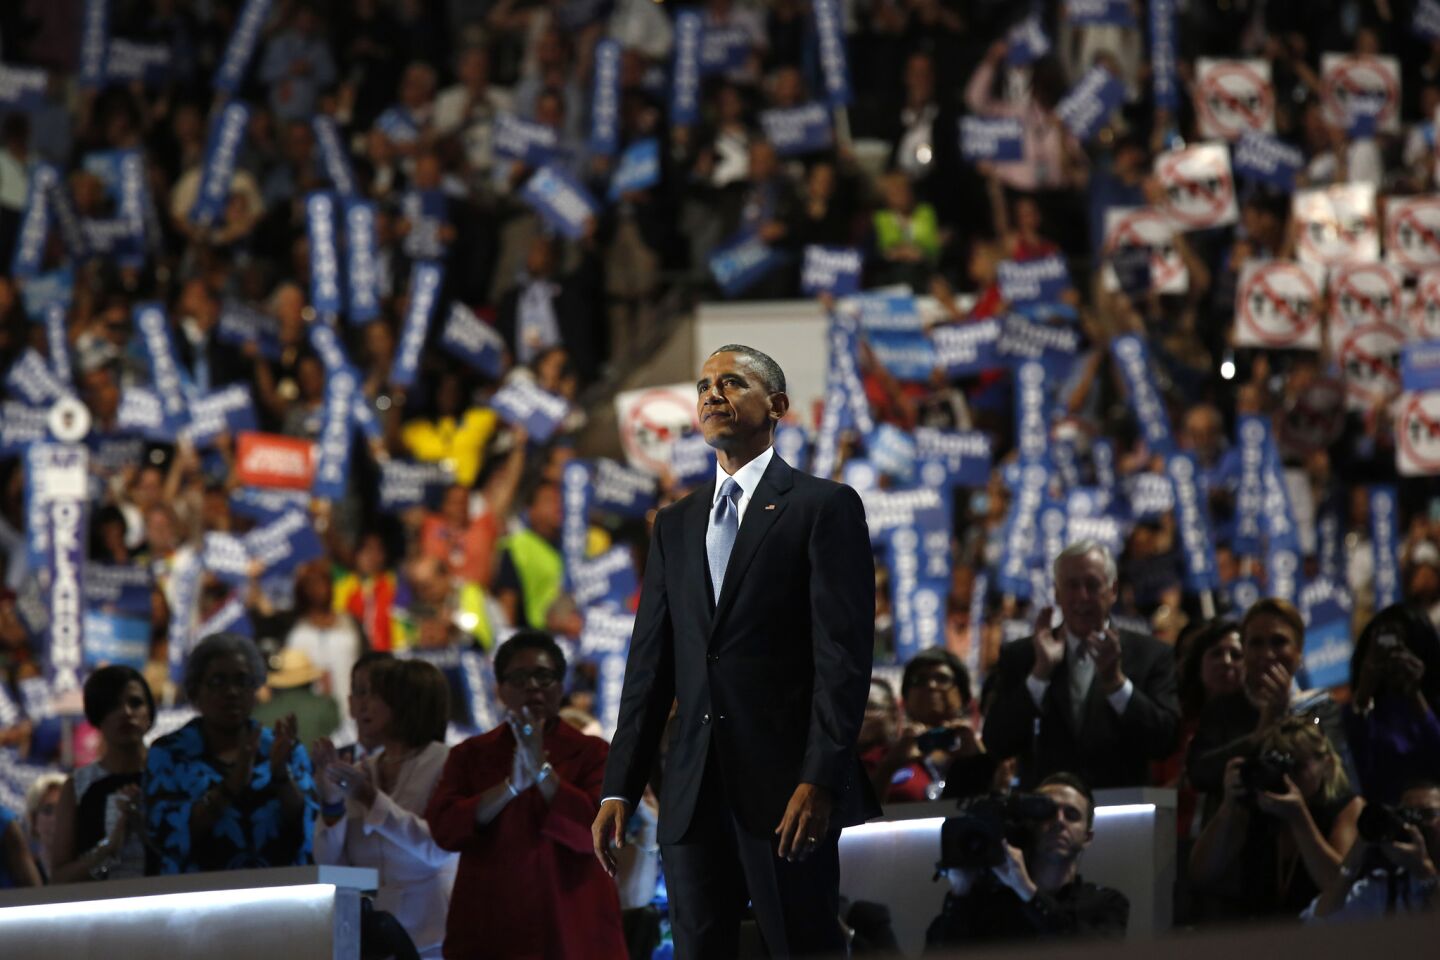 President Barak Obama is given a huge applause at the end of his speech on the third day of the Democratic National Convention.